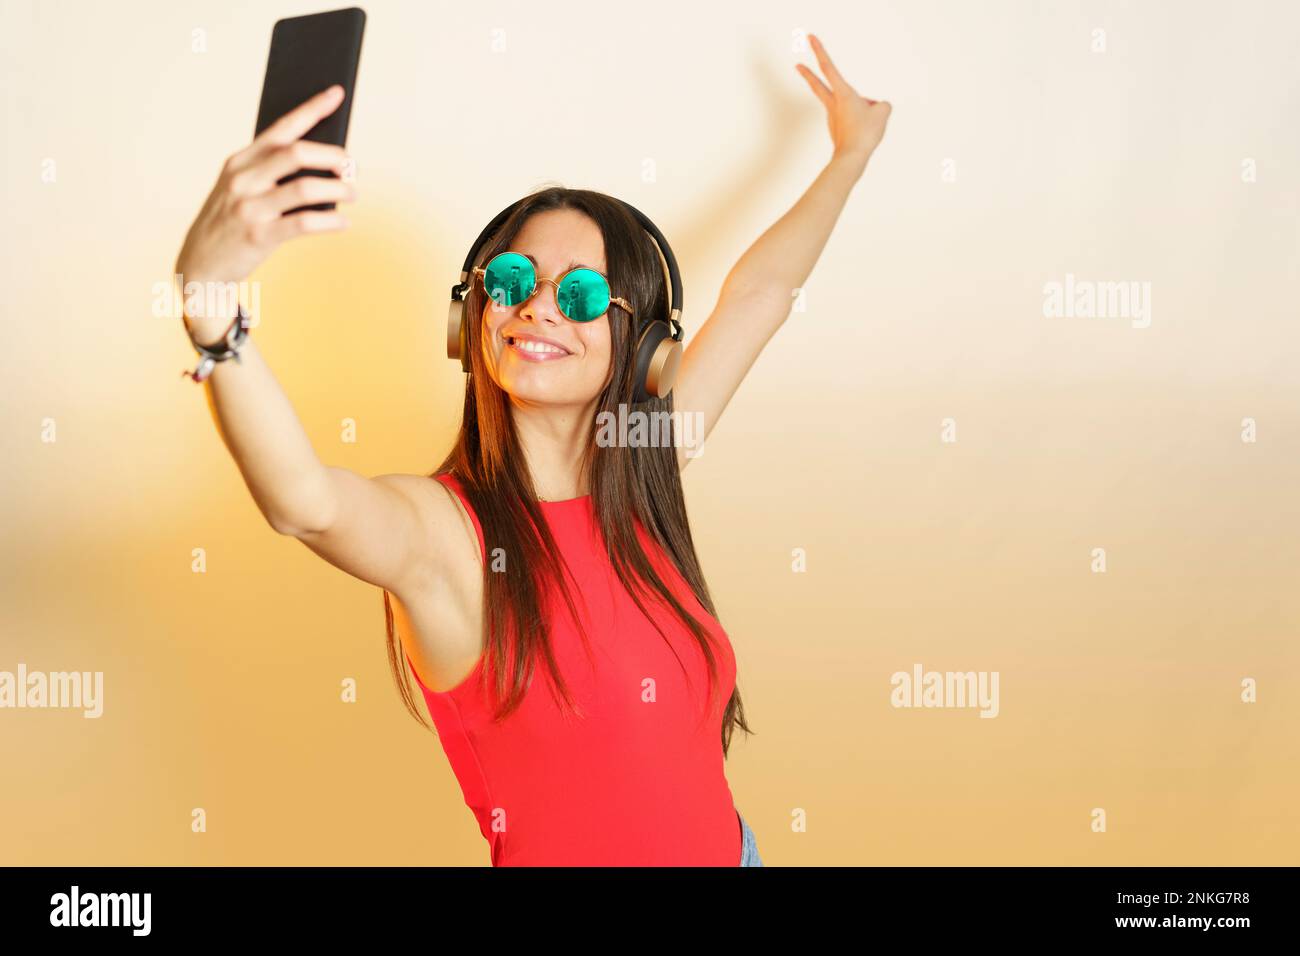 Smiling woman with steampunk glasses taking selfie on smart phone Stock Photo